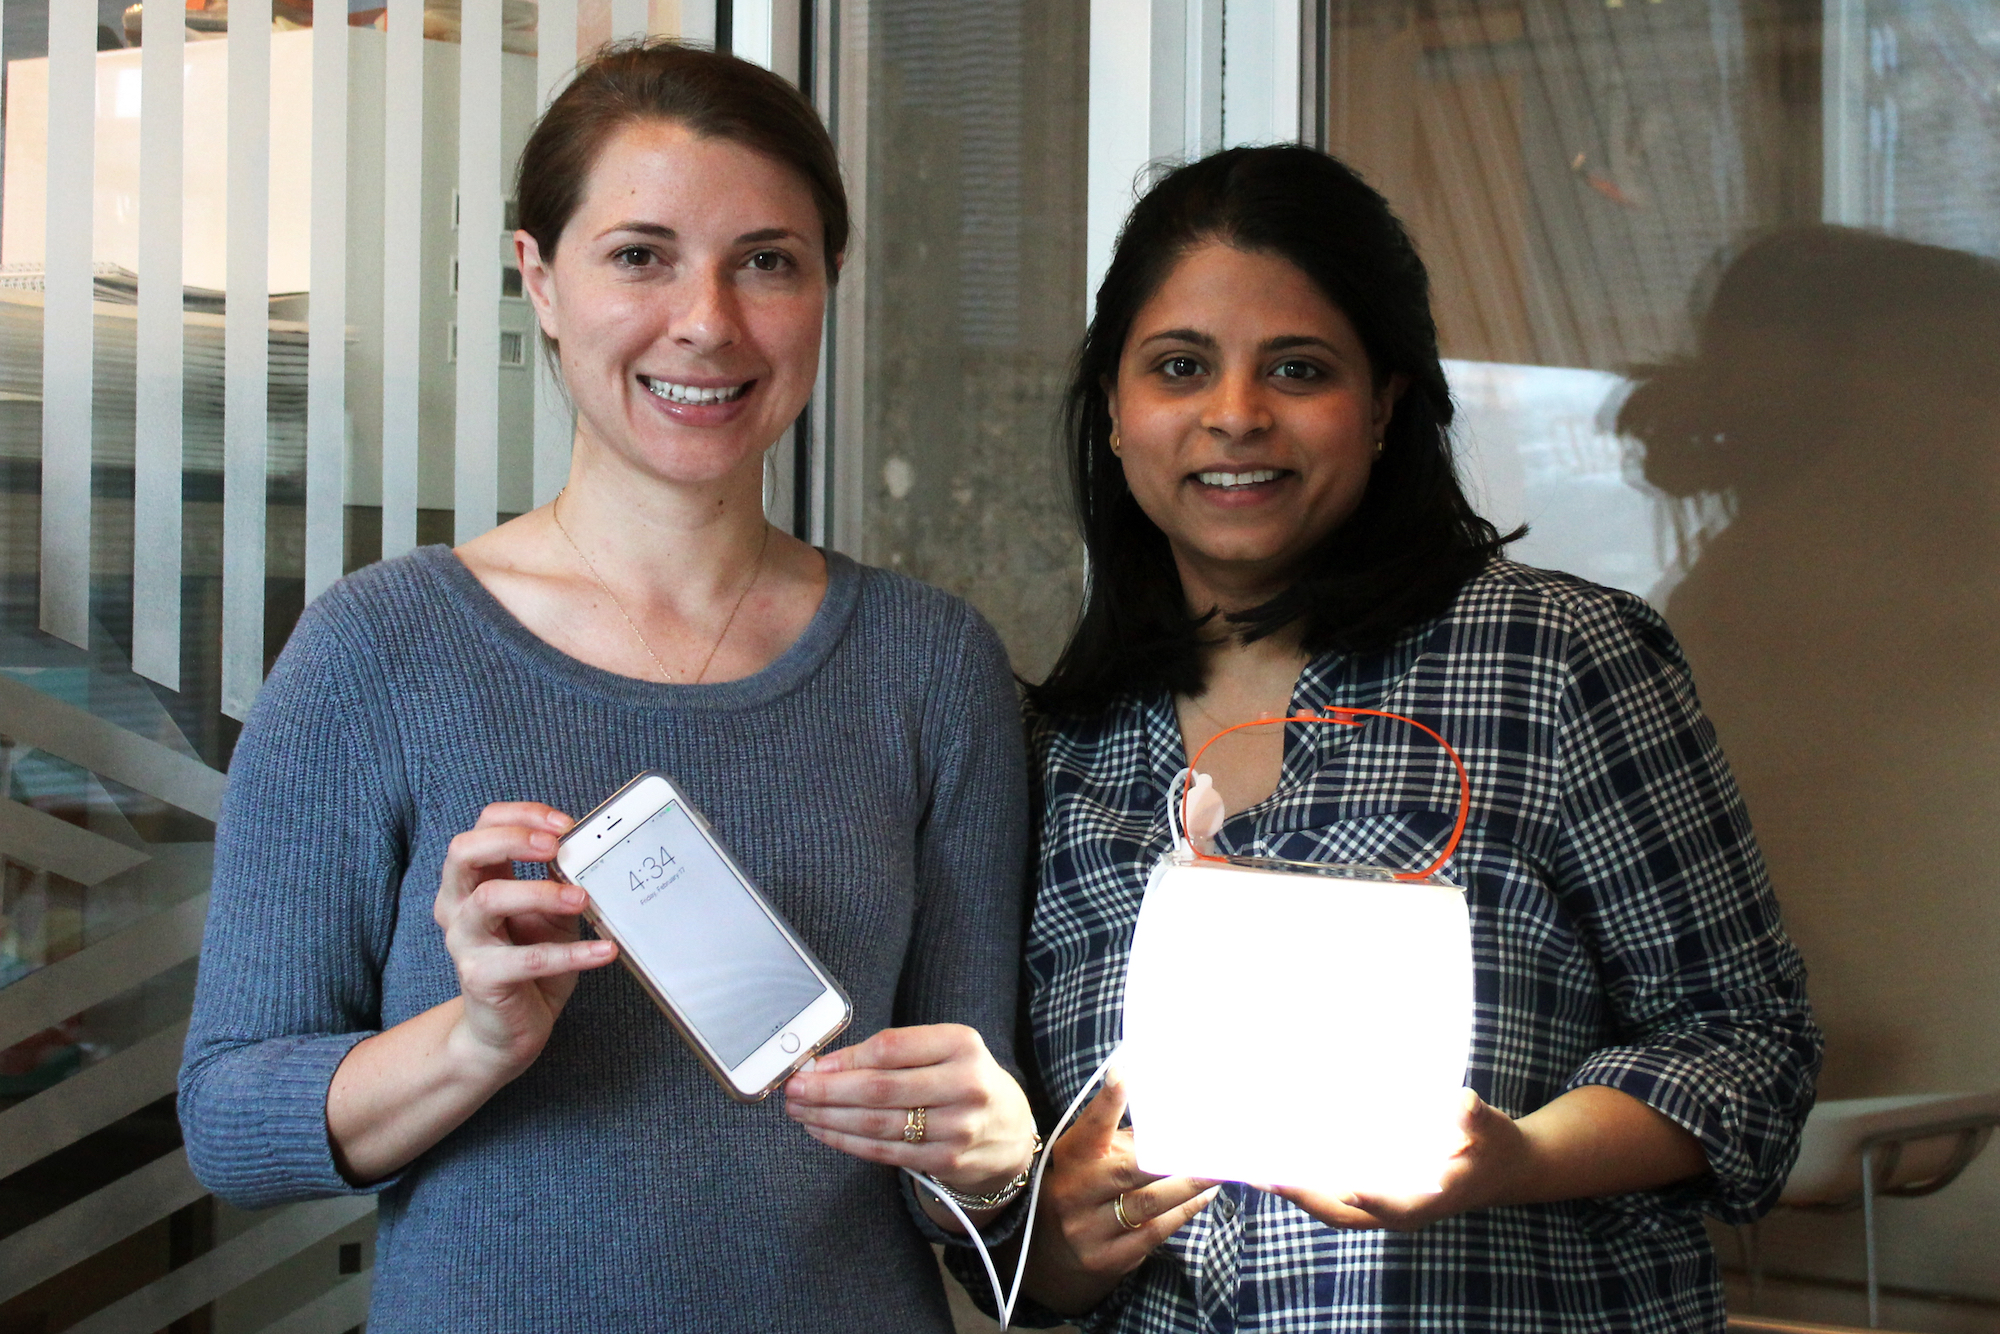 LuminAID co-founders Anna Stork and Andrea Sreshta first invented their solar inflatable technology after the 2010 Haiti Earthquake